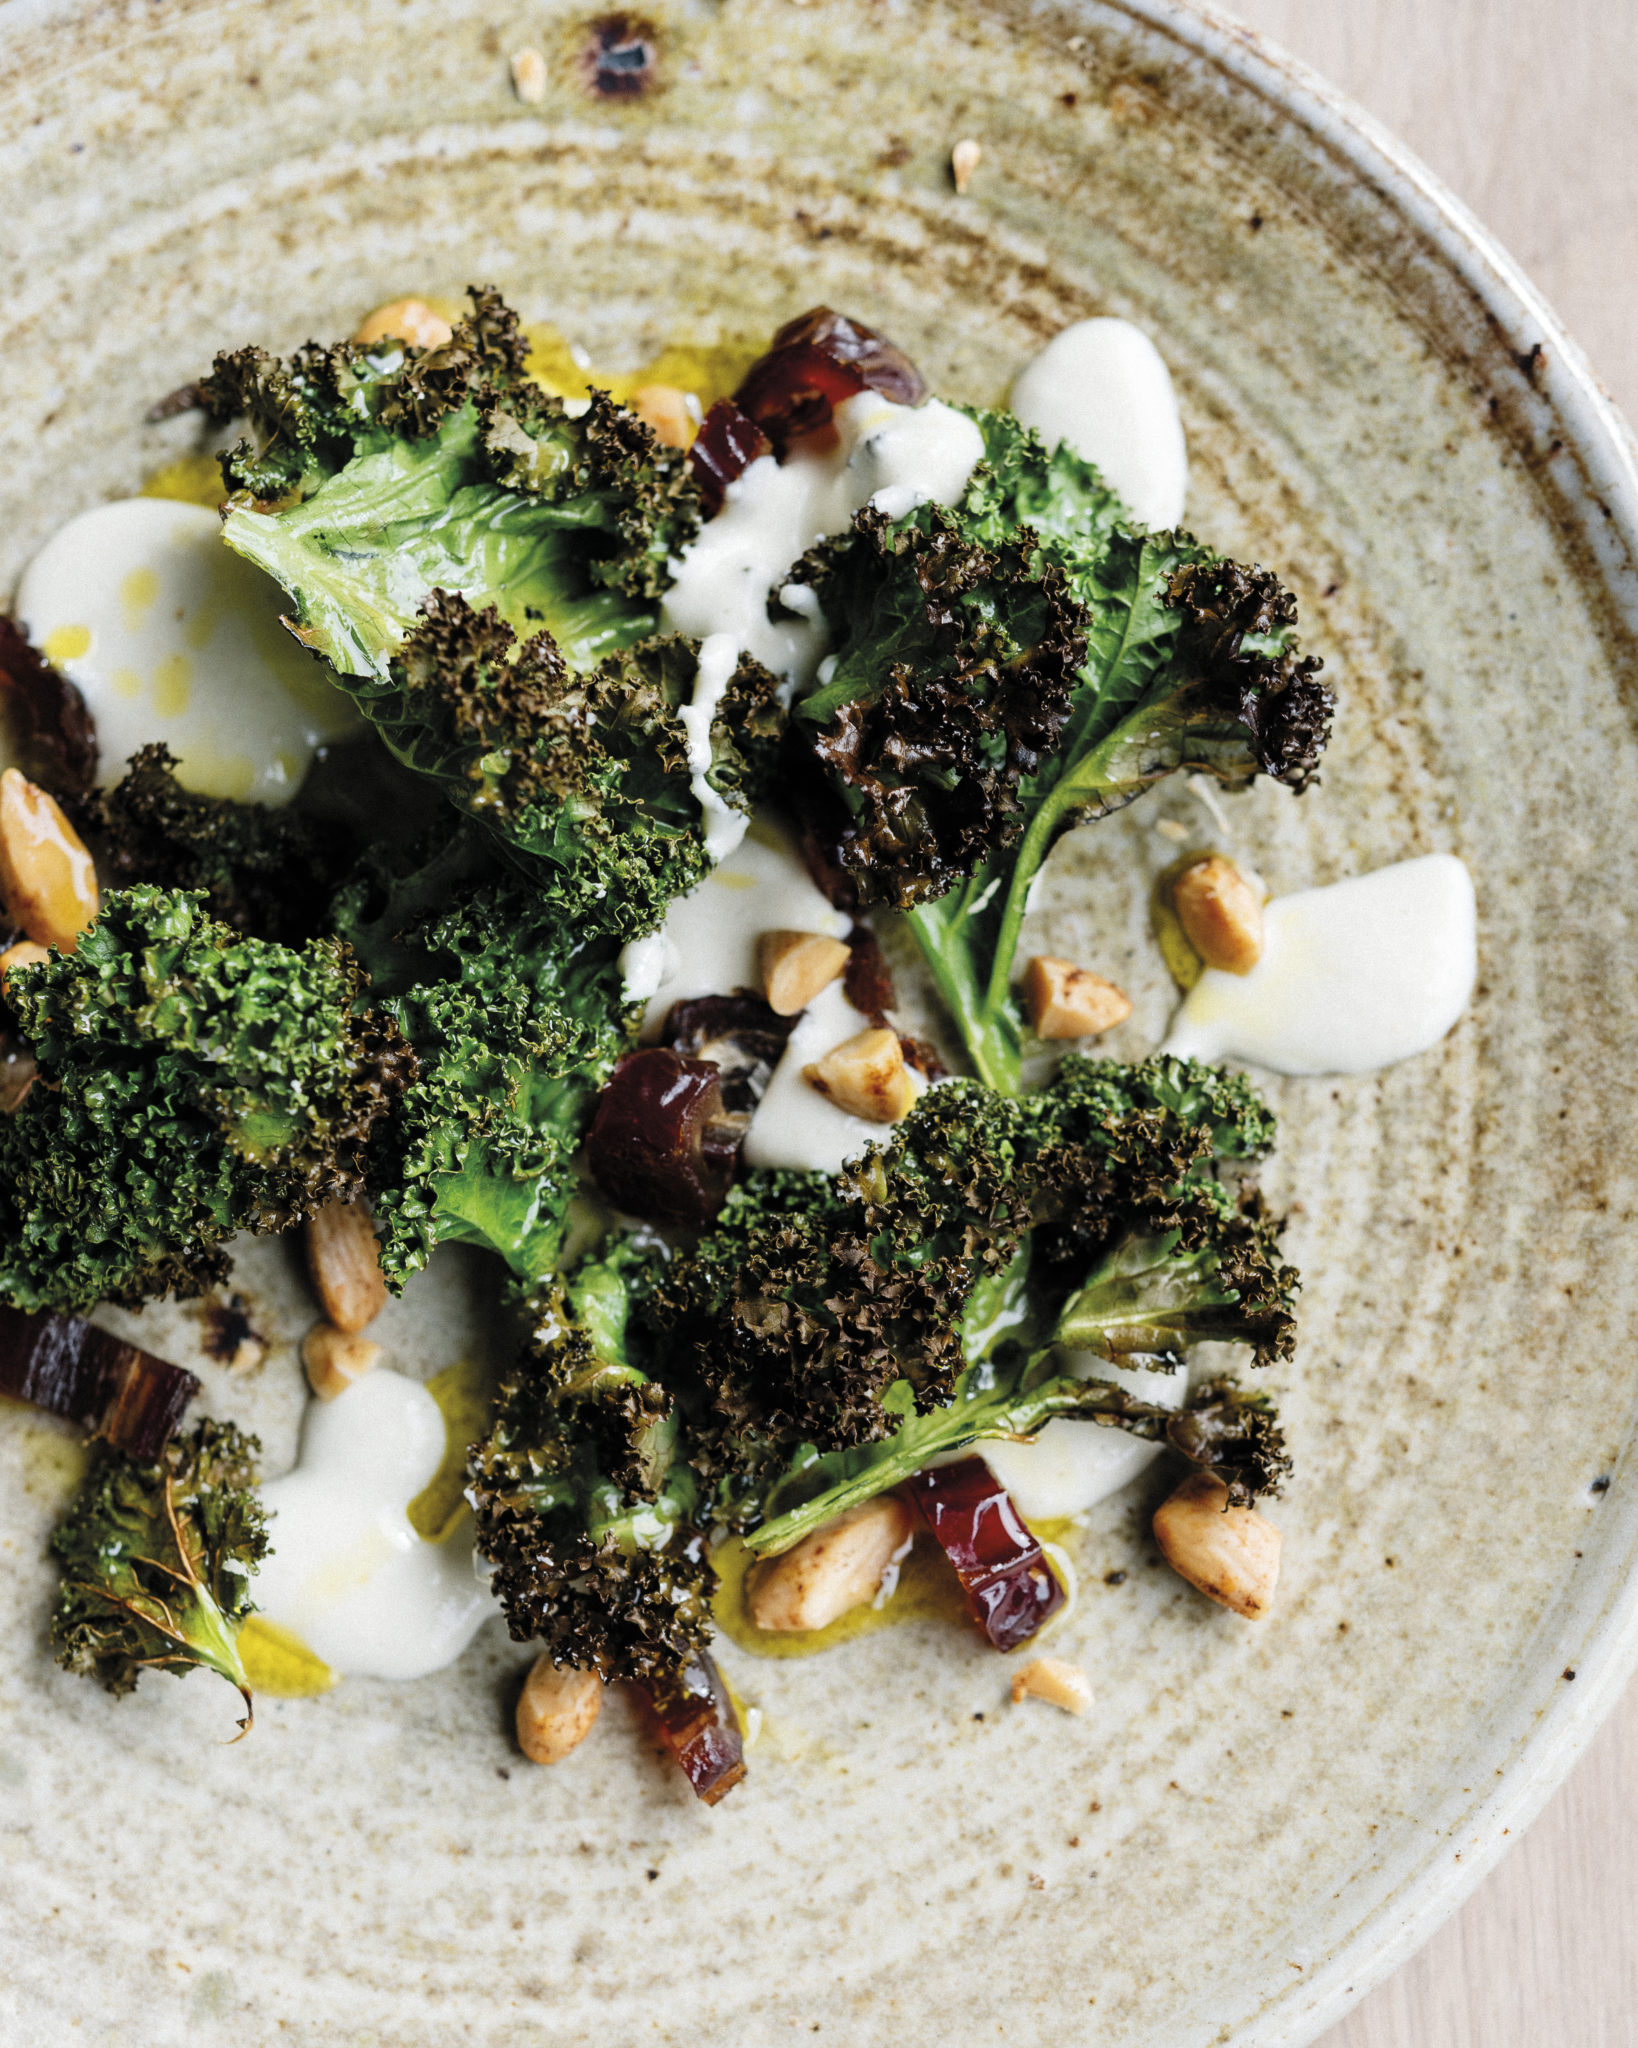 Al Brown’s Oven-Roasted Kale with Almond Cream and Dates